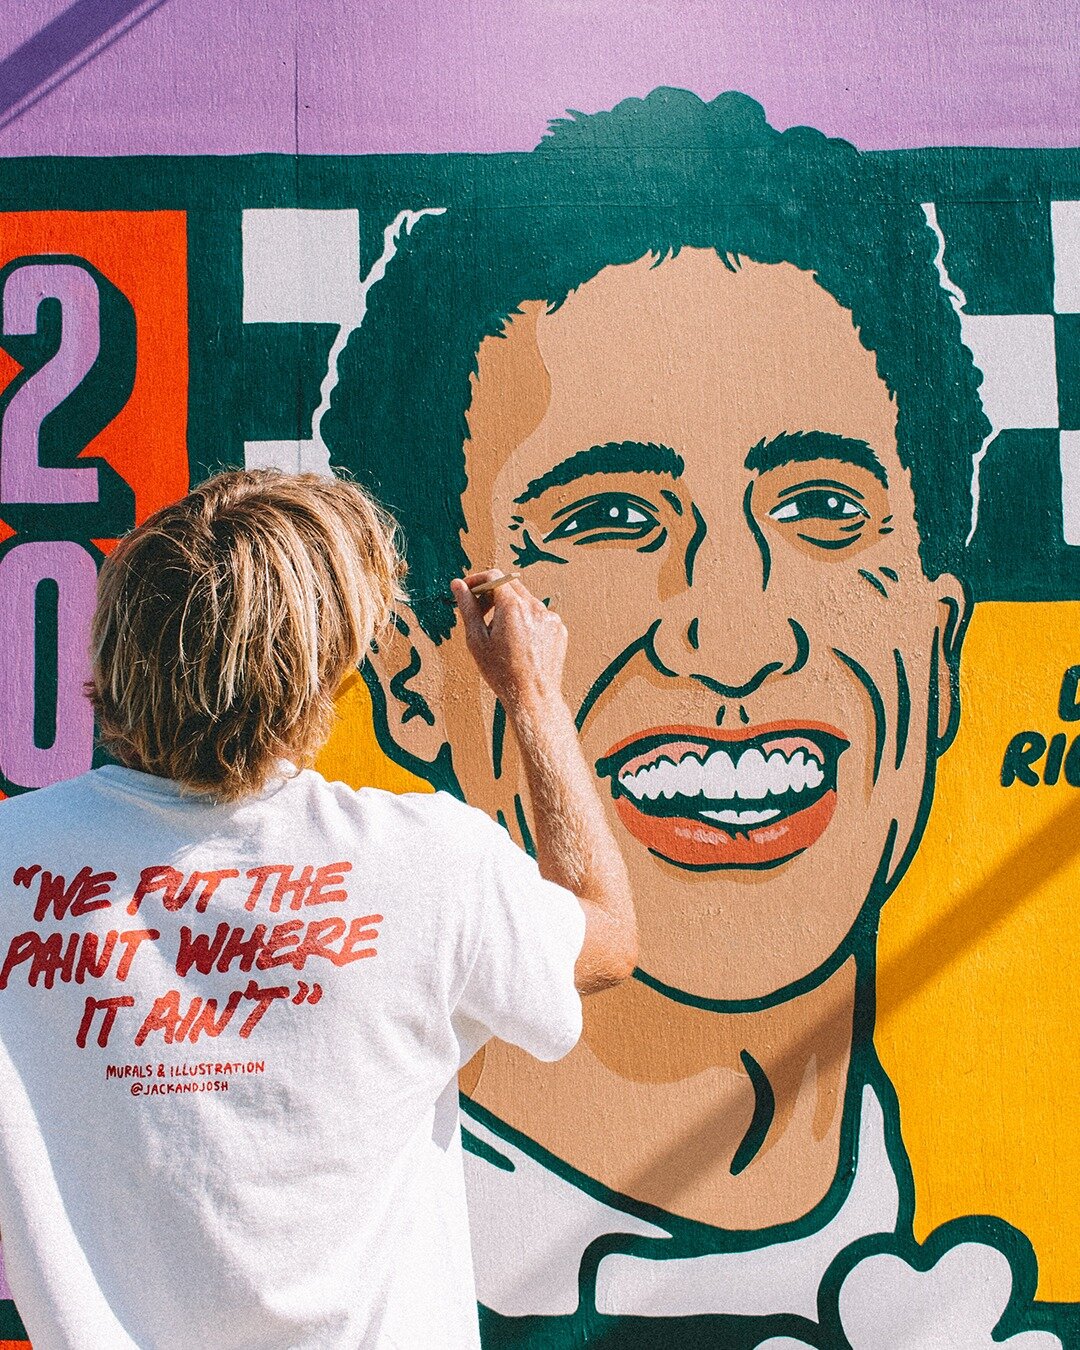 A pinch yourself moment last week painting live at the F1 Australian Grand Prix, definitely one of the biggest events we have been a part of. We had a ball &ndash; from meeting everyone who dropped past for a chat and a photo, to the live music and f